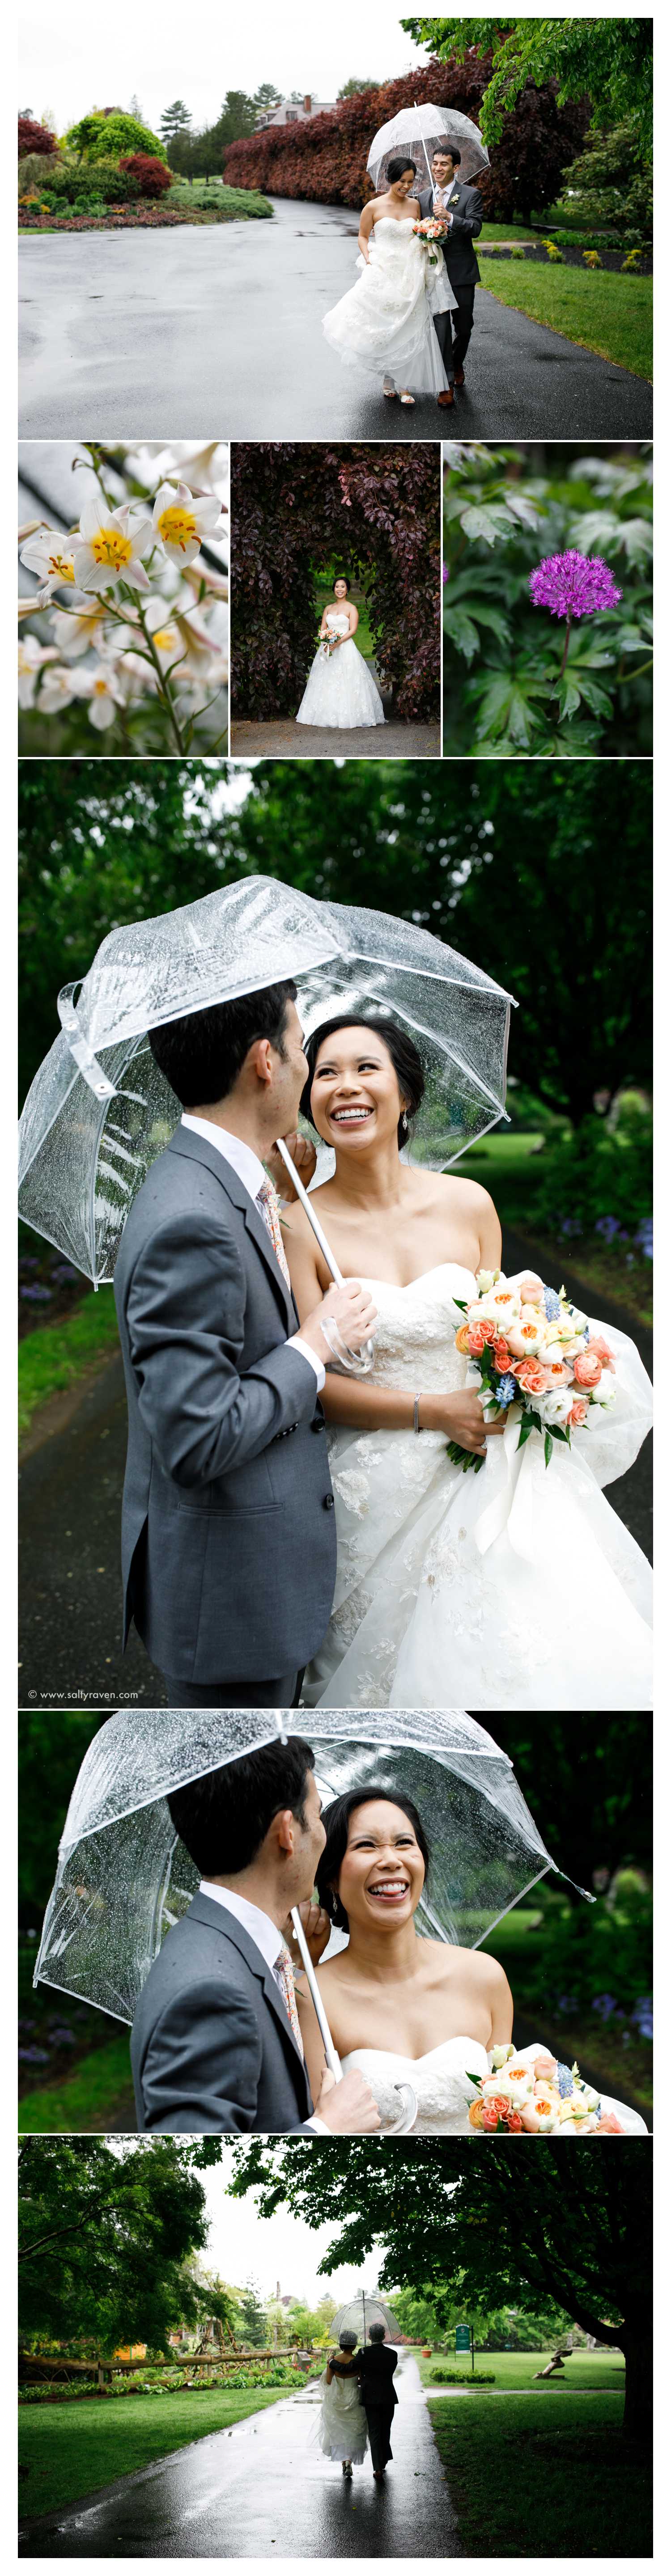 Bride and groom walking under an umbrella in the rain on their wedding day.